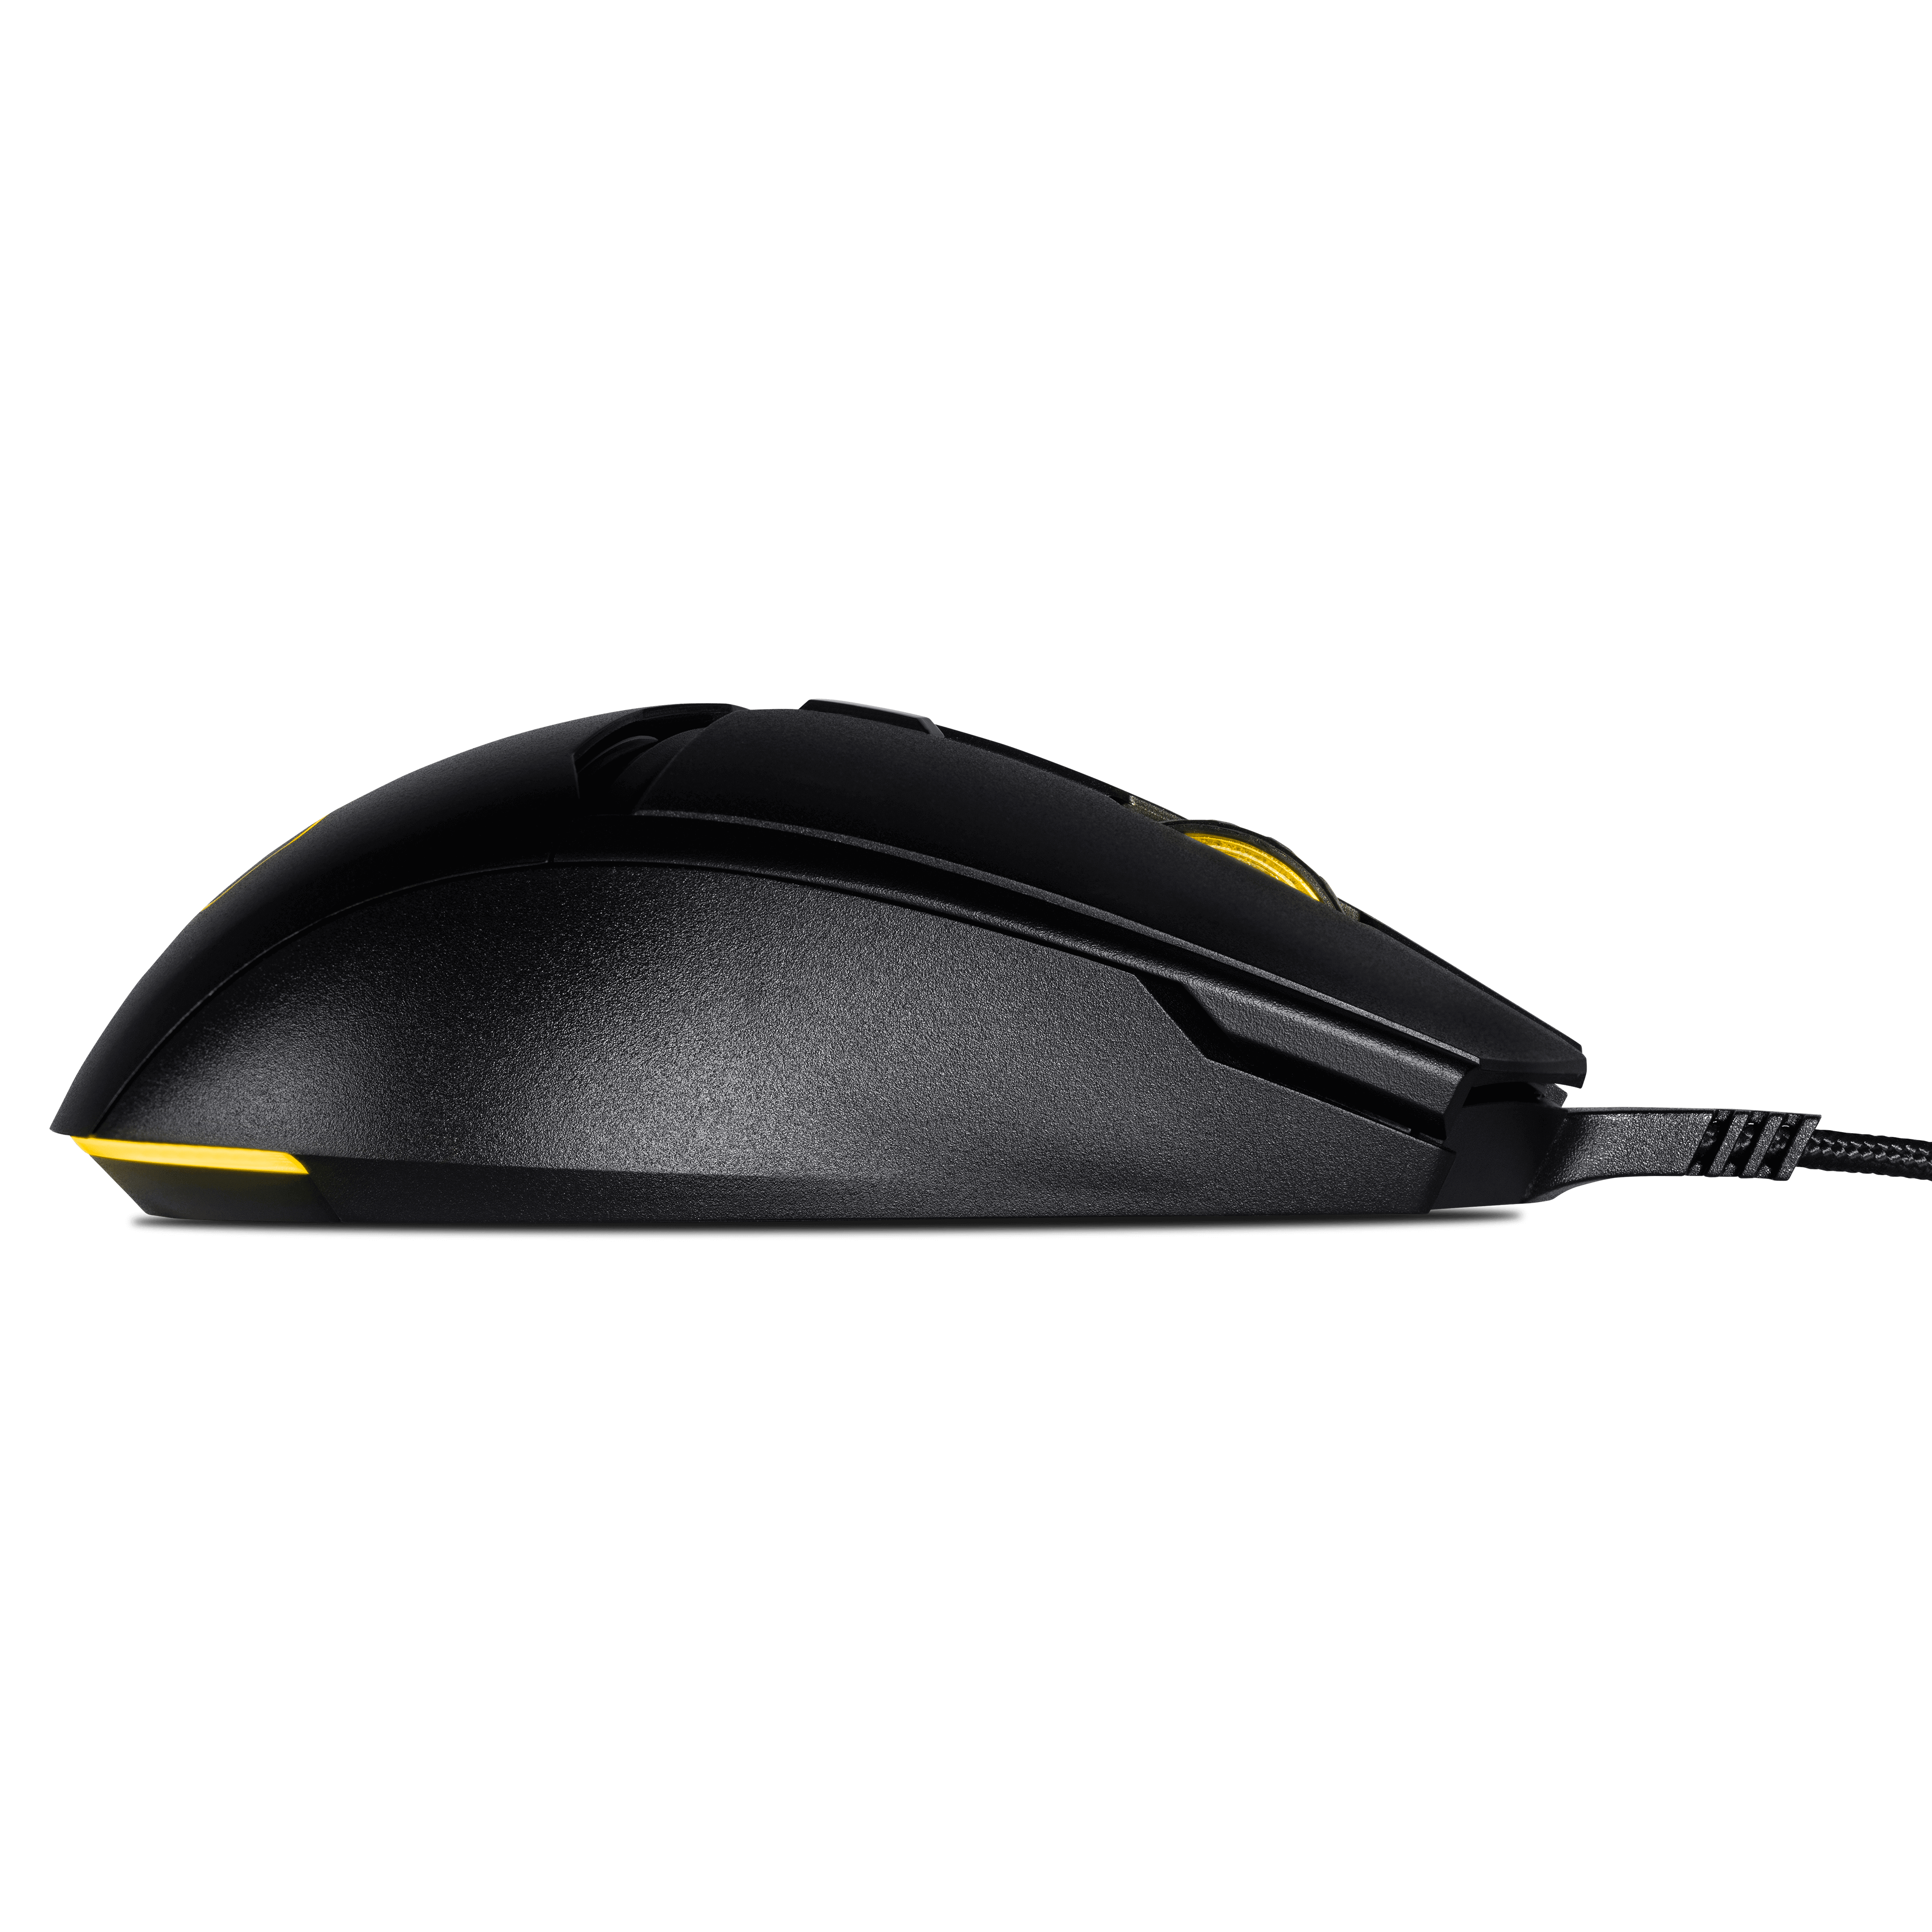 MM830 Gaming Mouse | Cooler Master